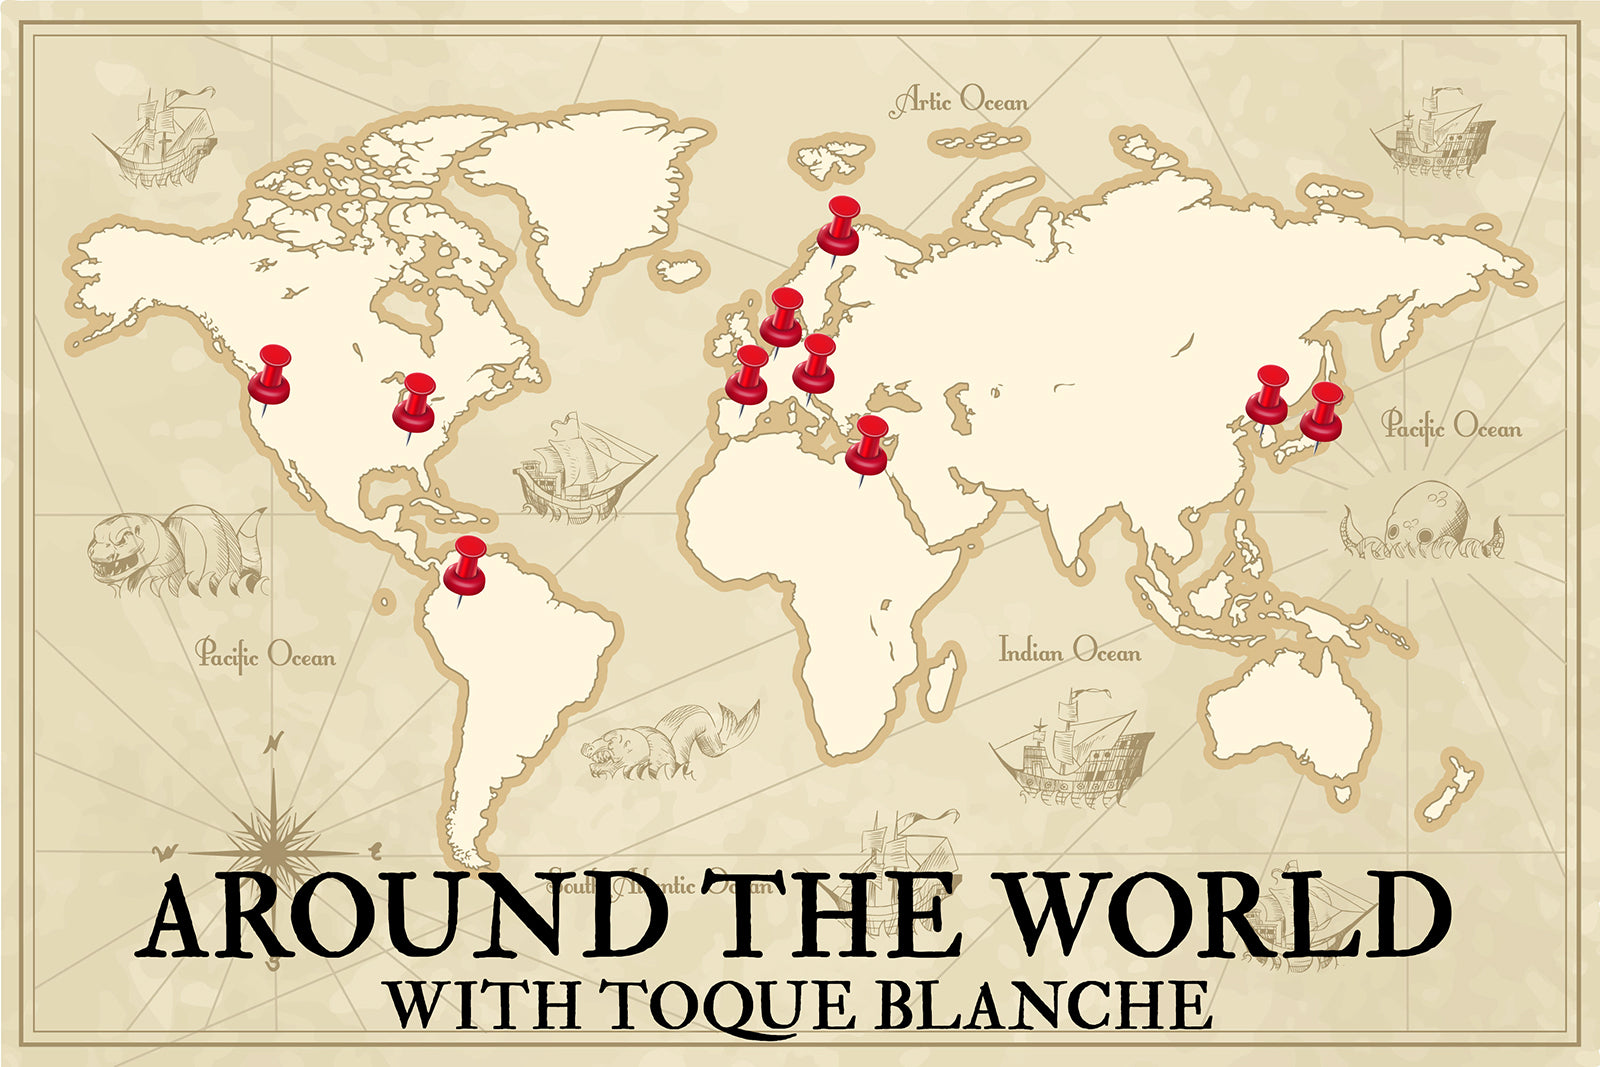 Around the World with Toque Blanche